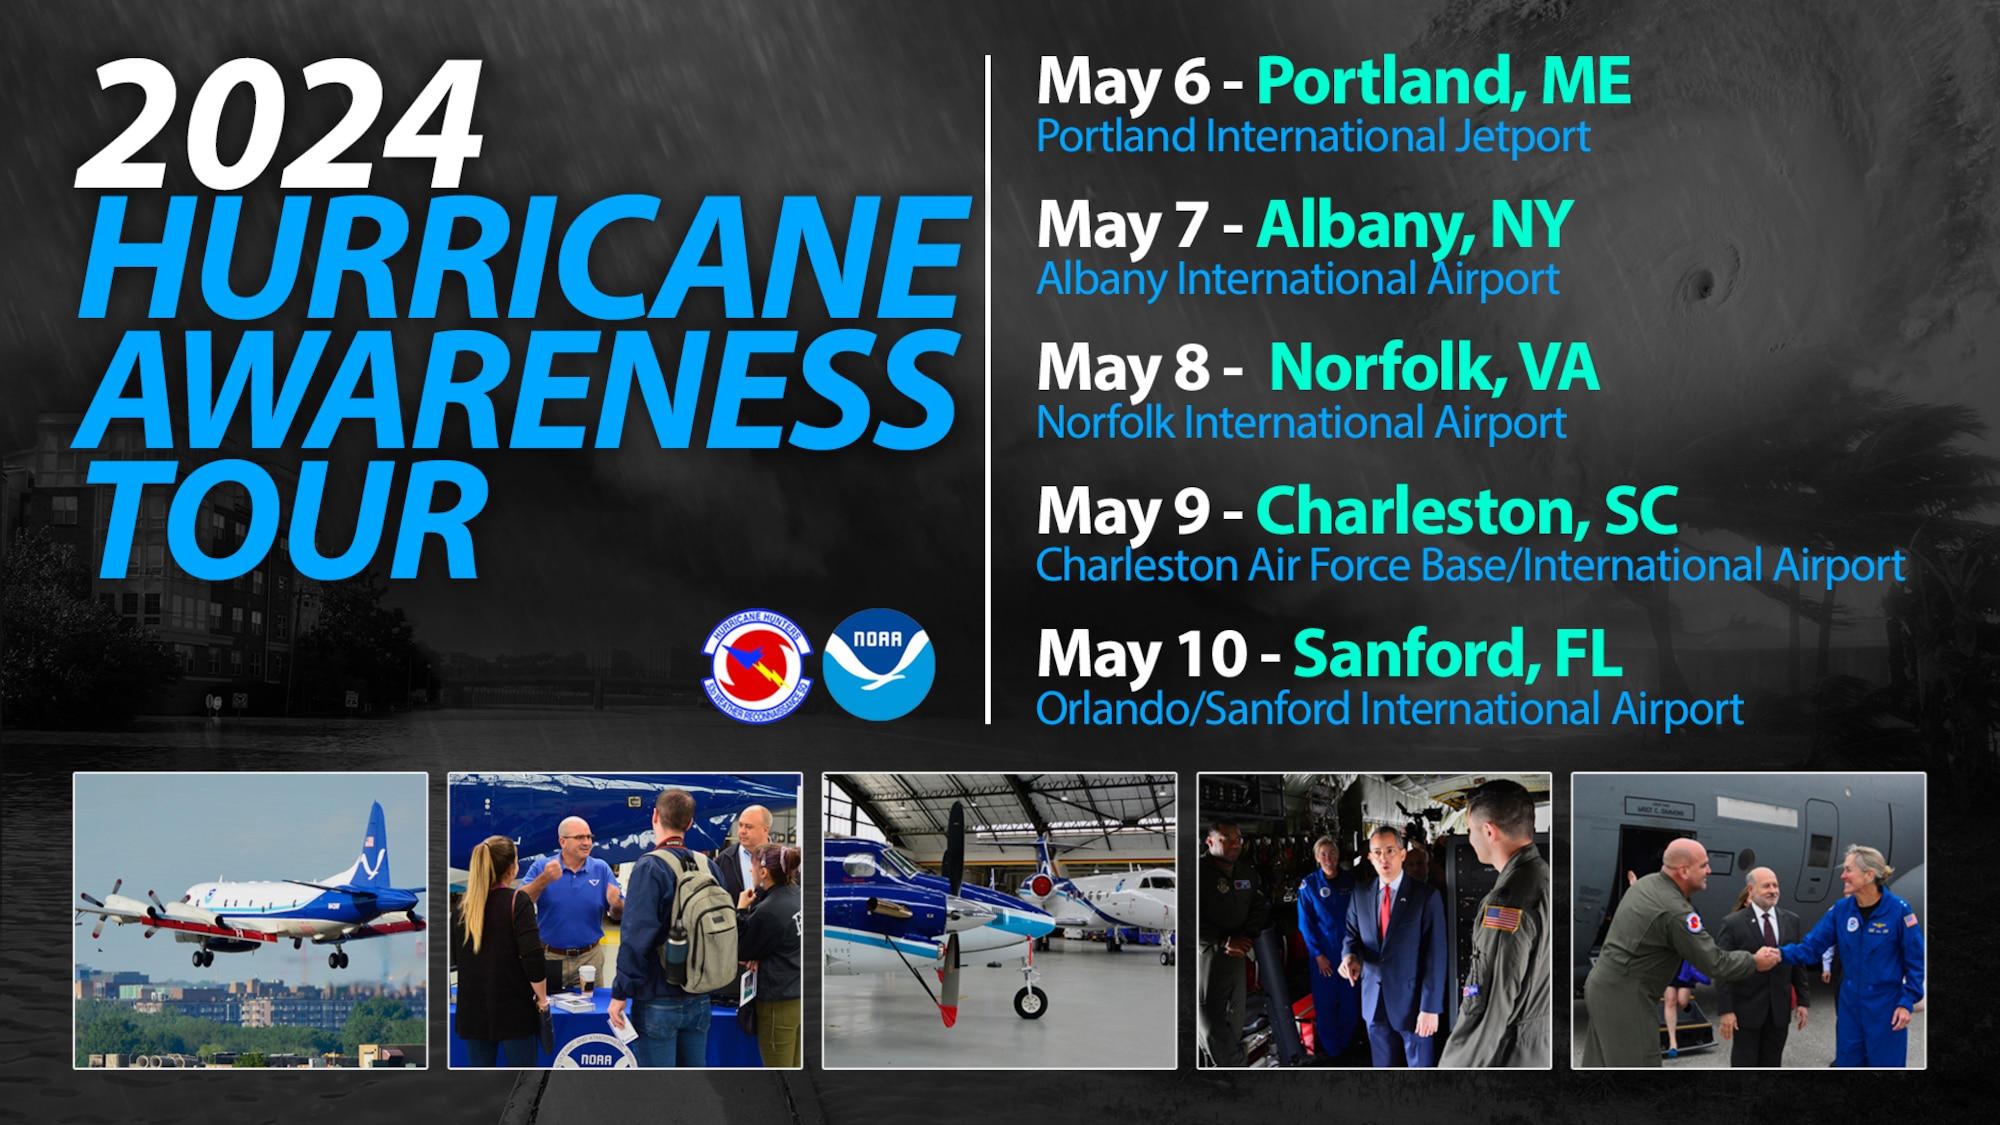 Graphic showing dates and locations of the Hurricane Awareness Tour 2024